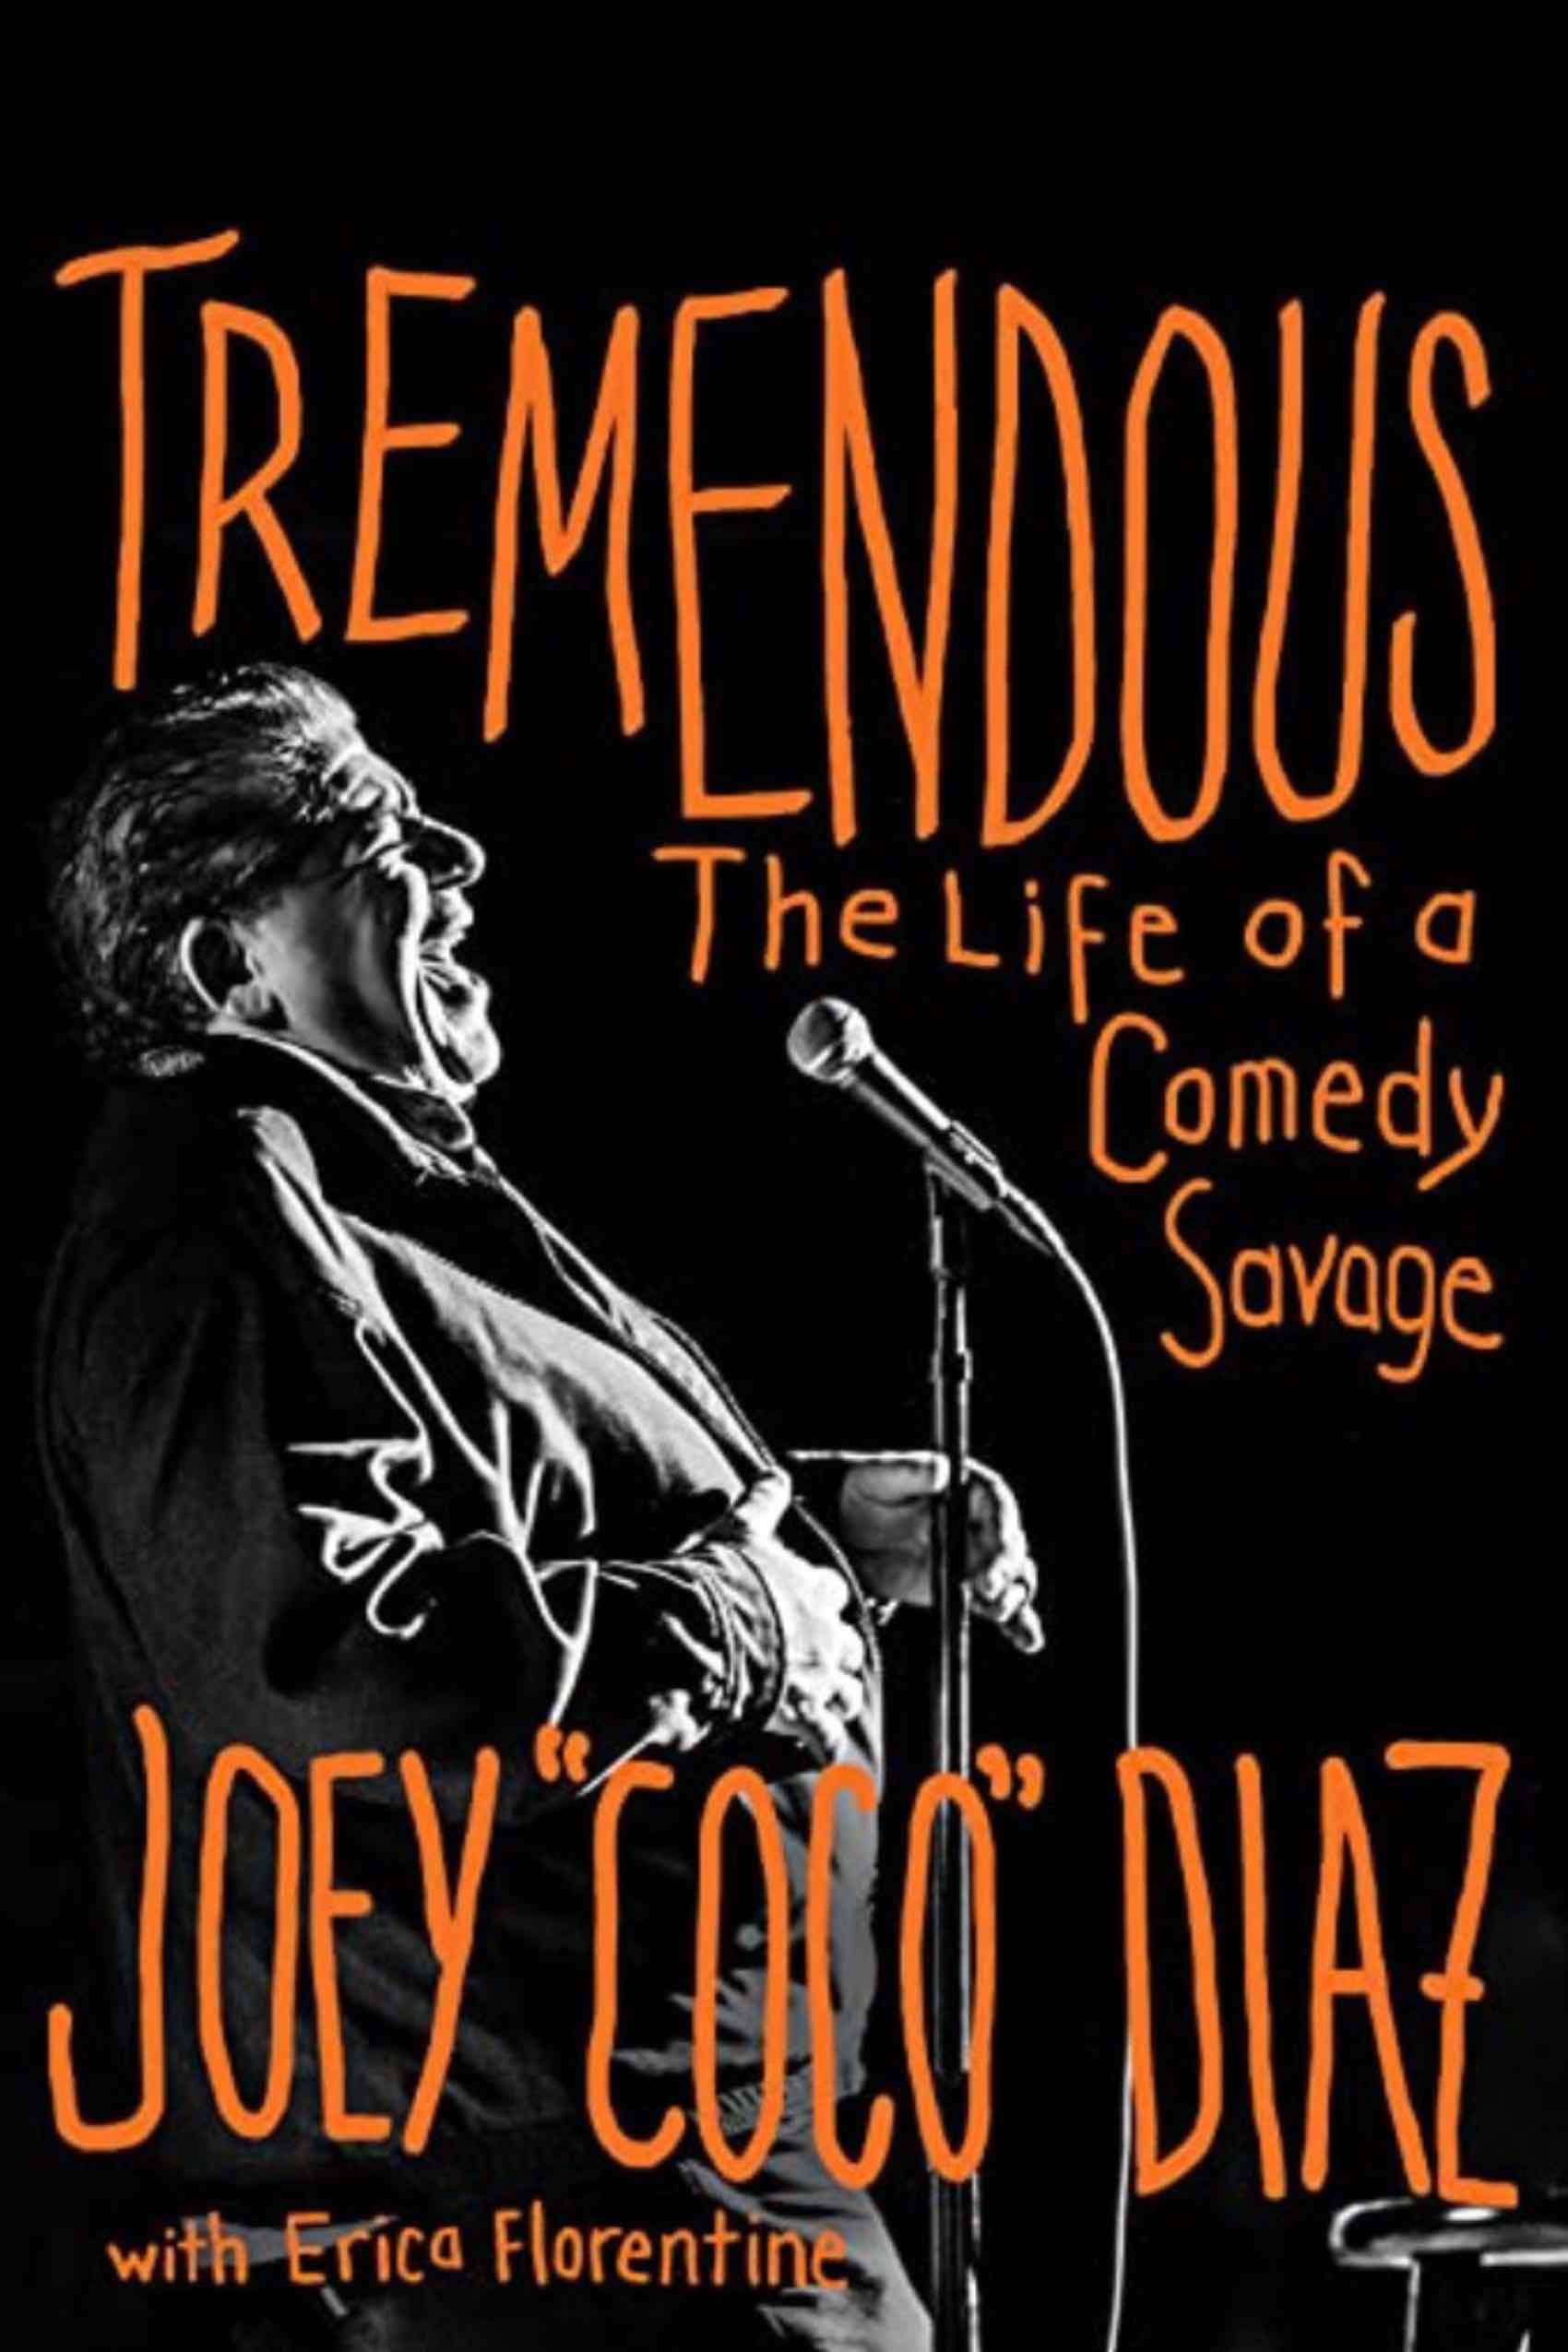 Featured image for “JOEY DIAZ IS TREMENDOUS”